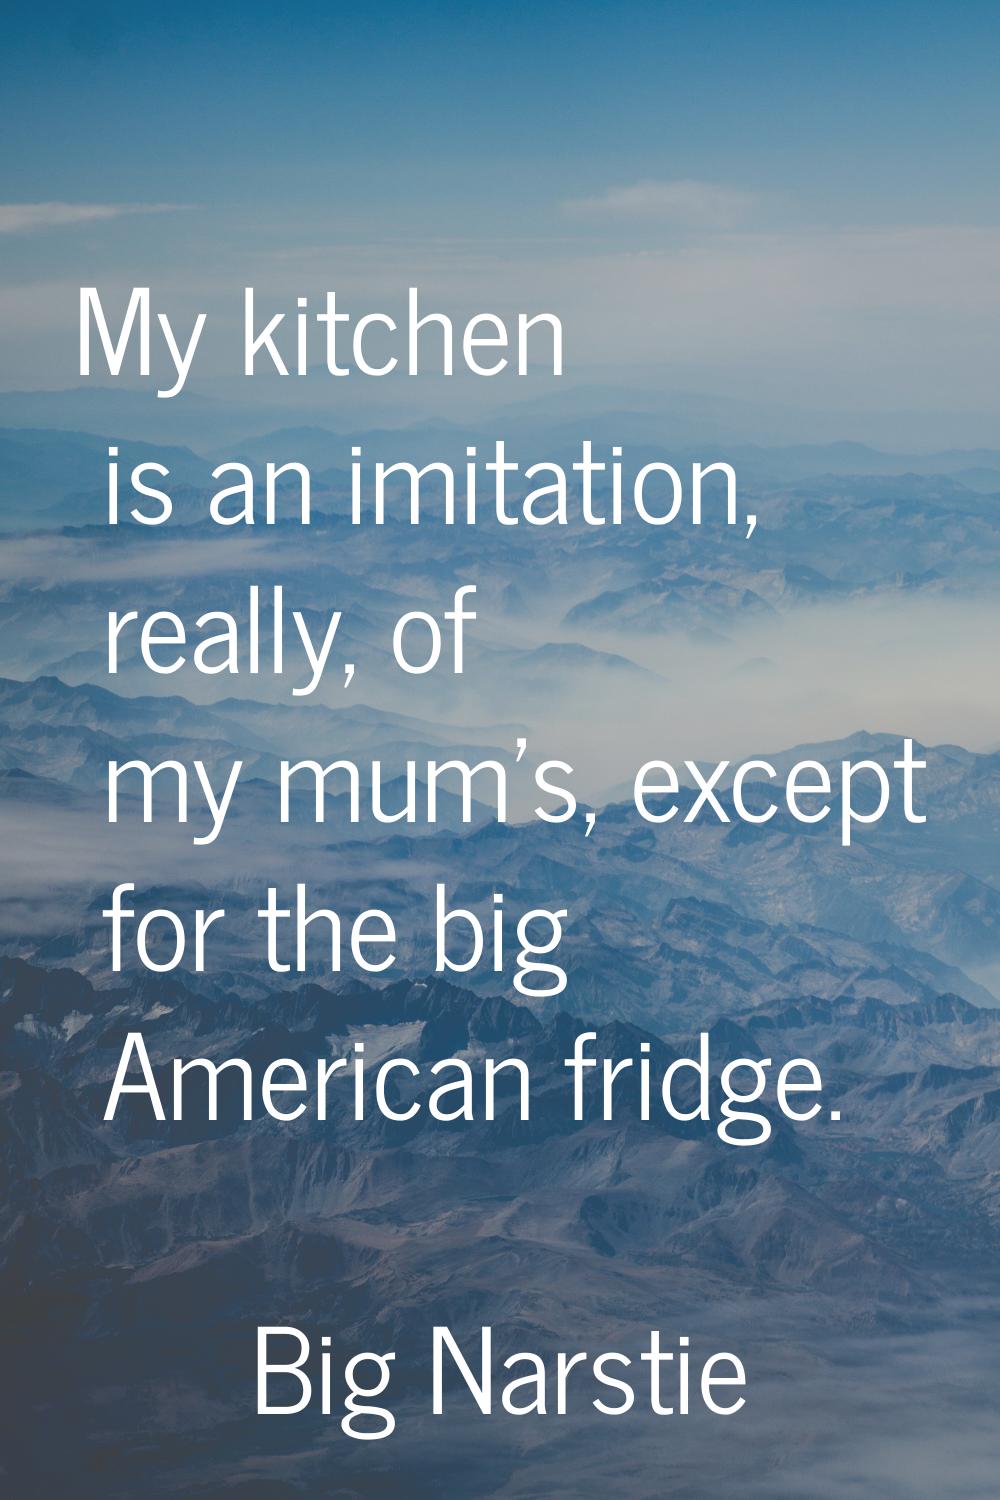 My kitchen is an imitation, really, of my mum's, except for the big American fridge.